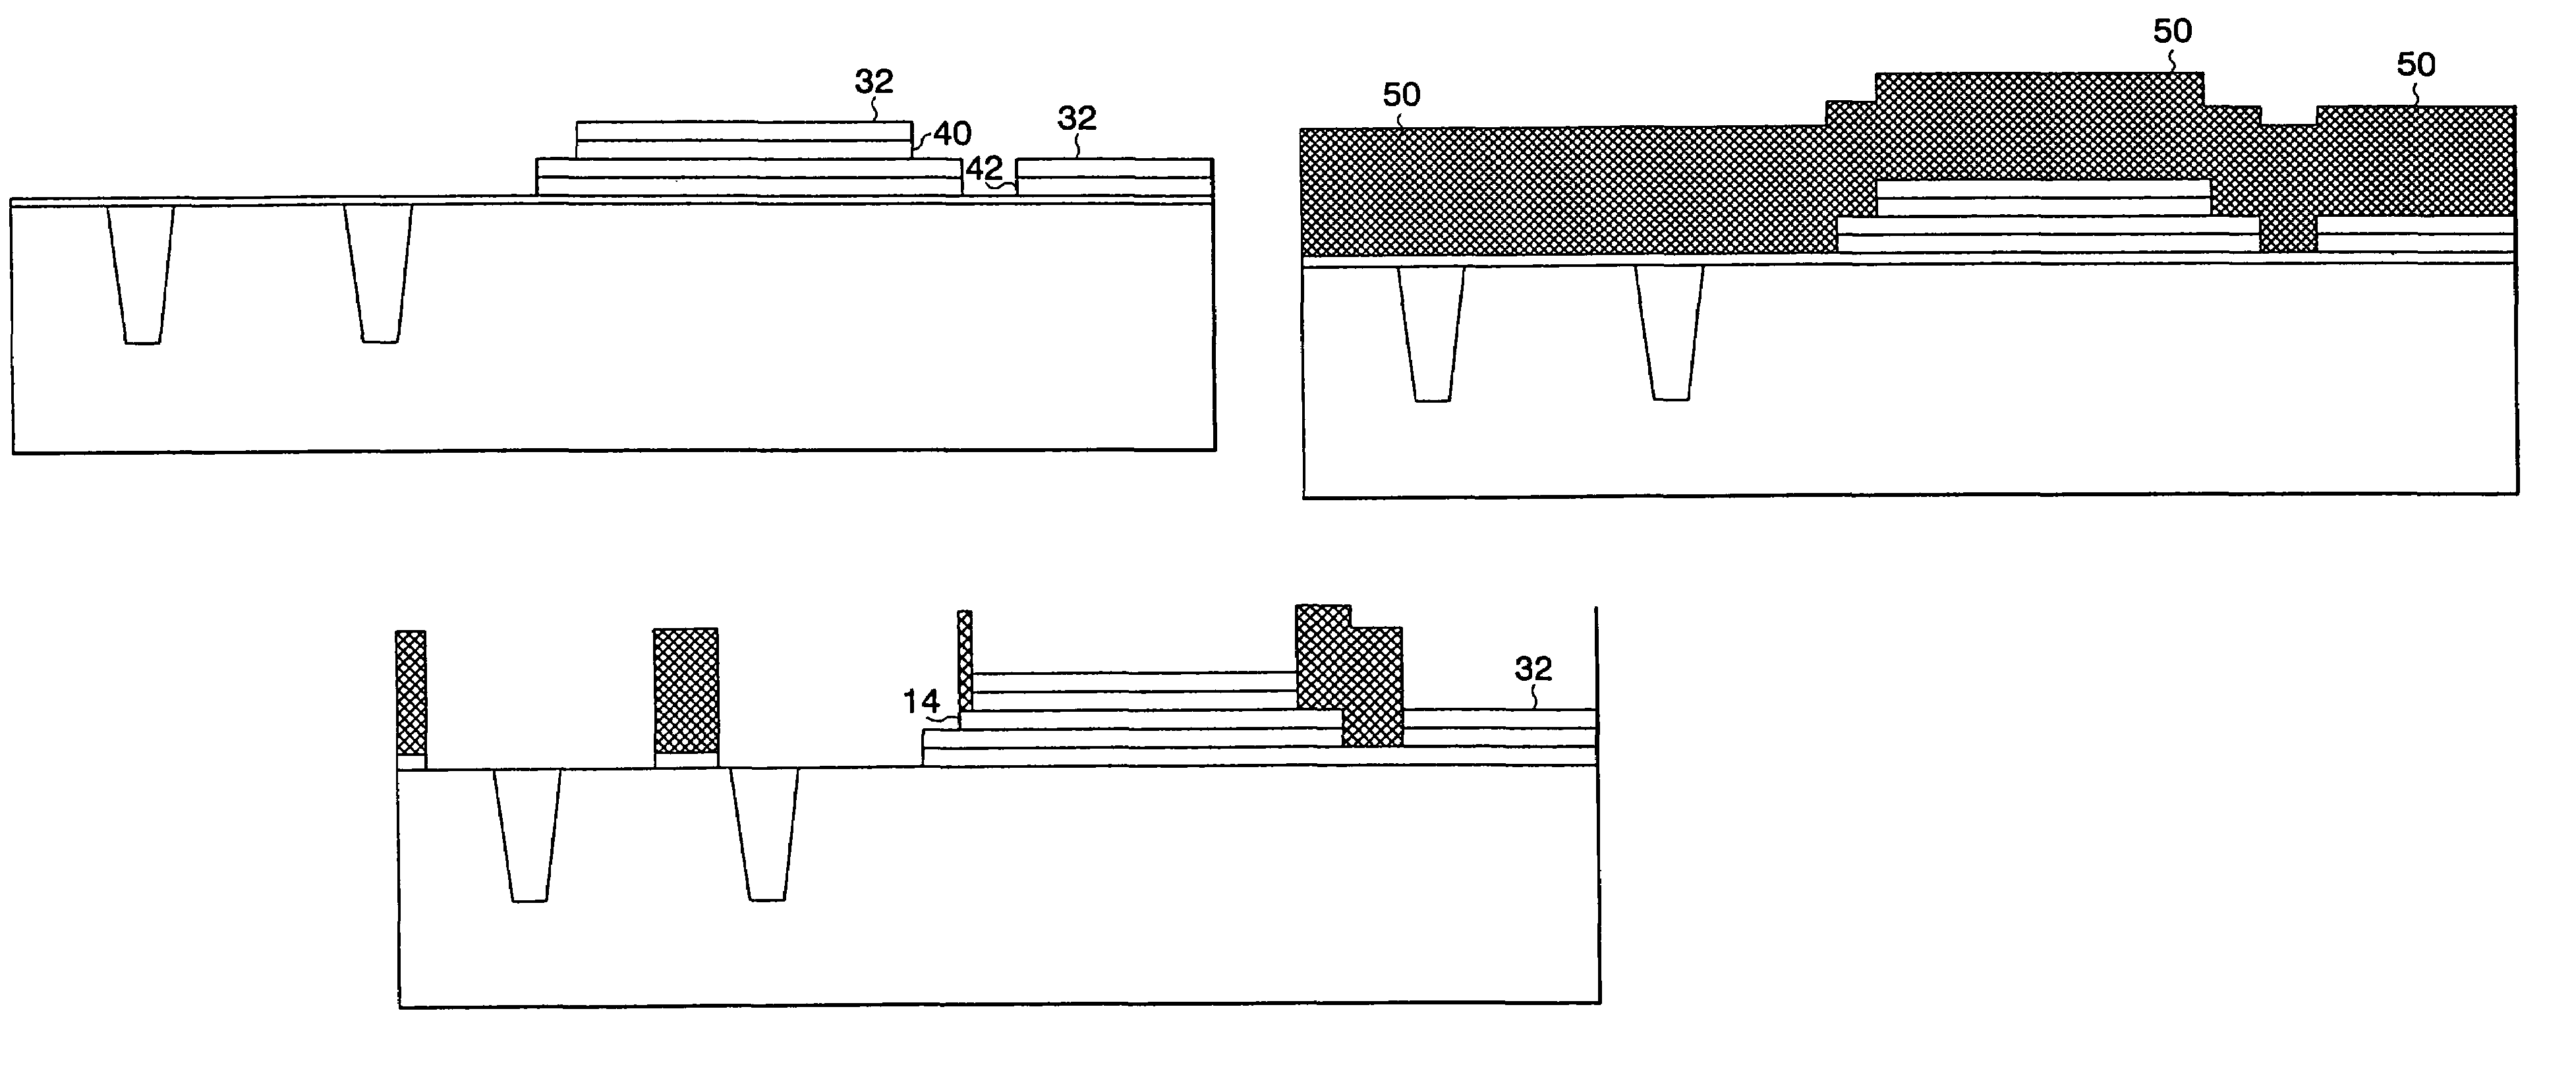 Method of fabrication of MIMCAP and resistor at same level